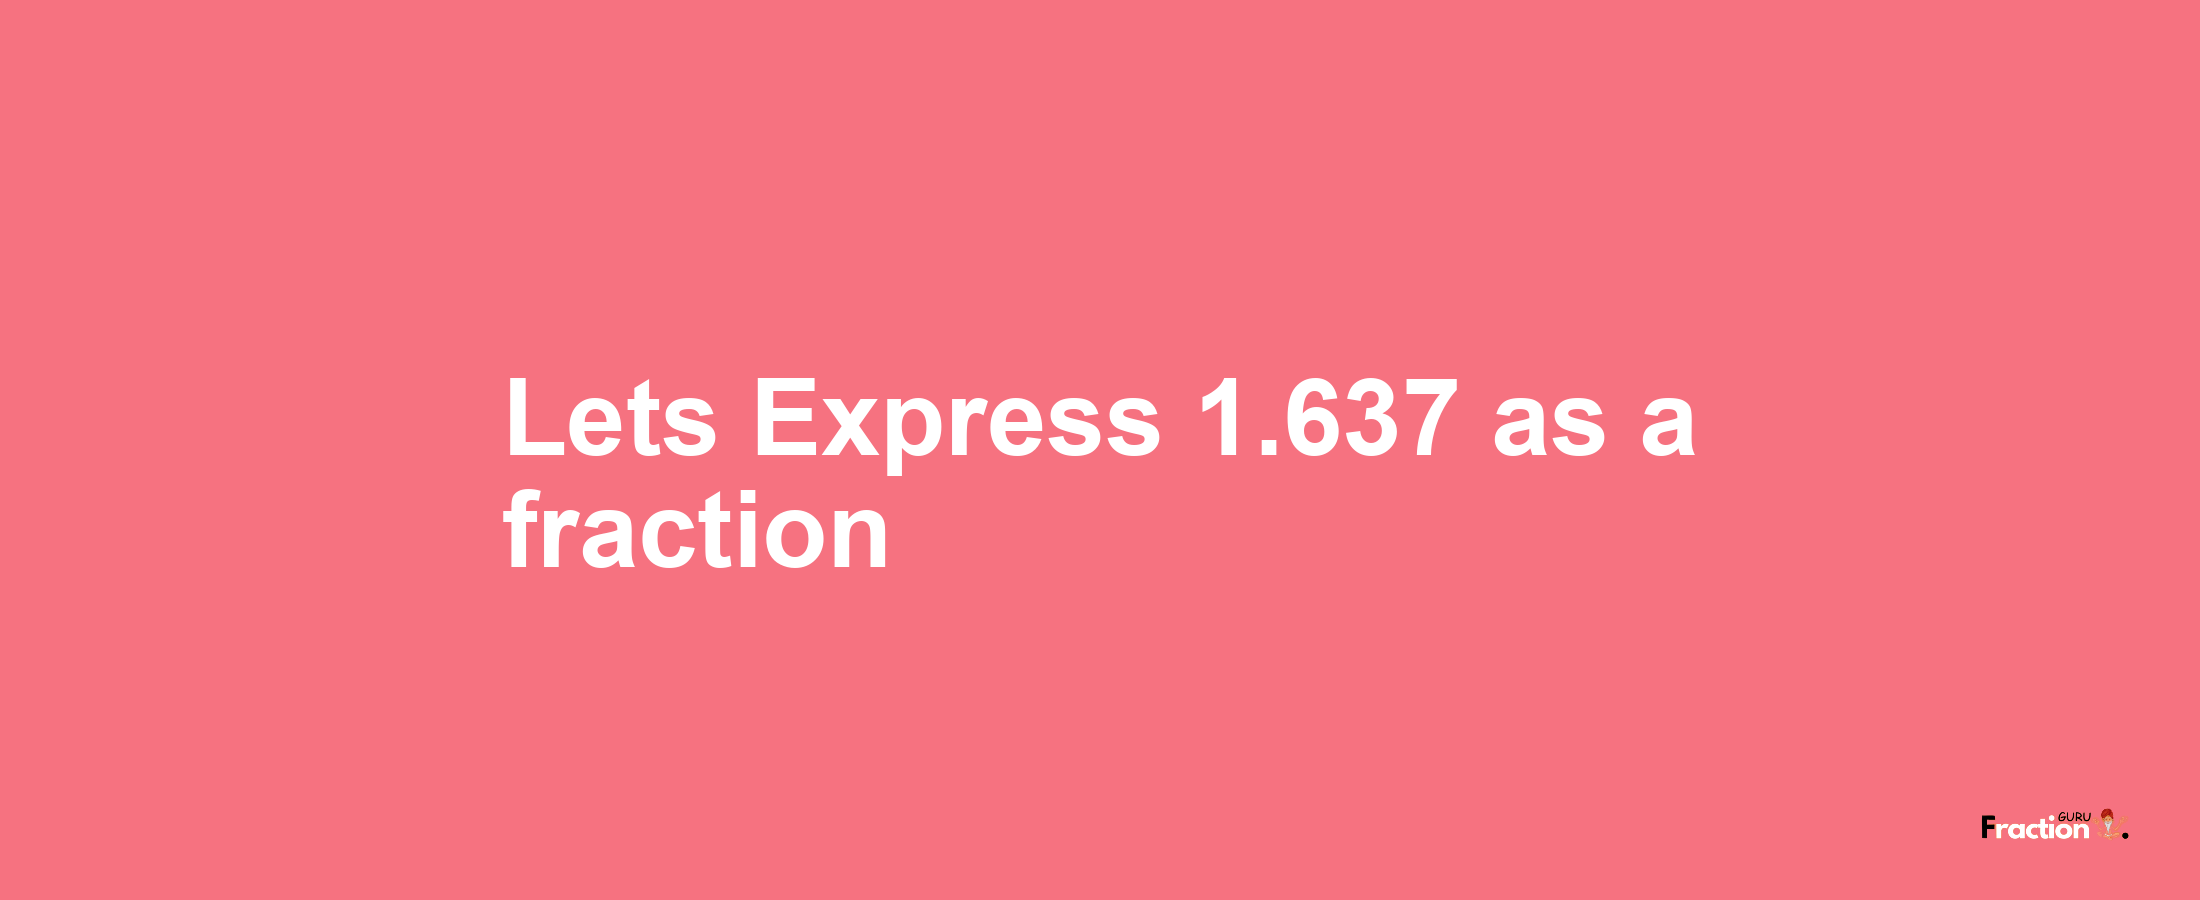 Lets Express 1.637 as afraction